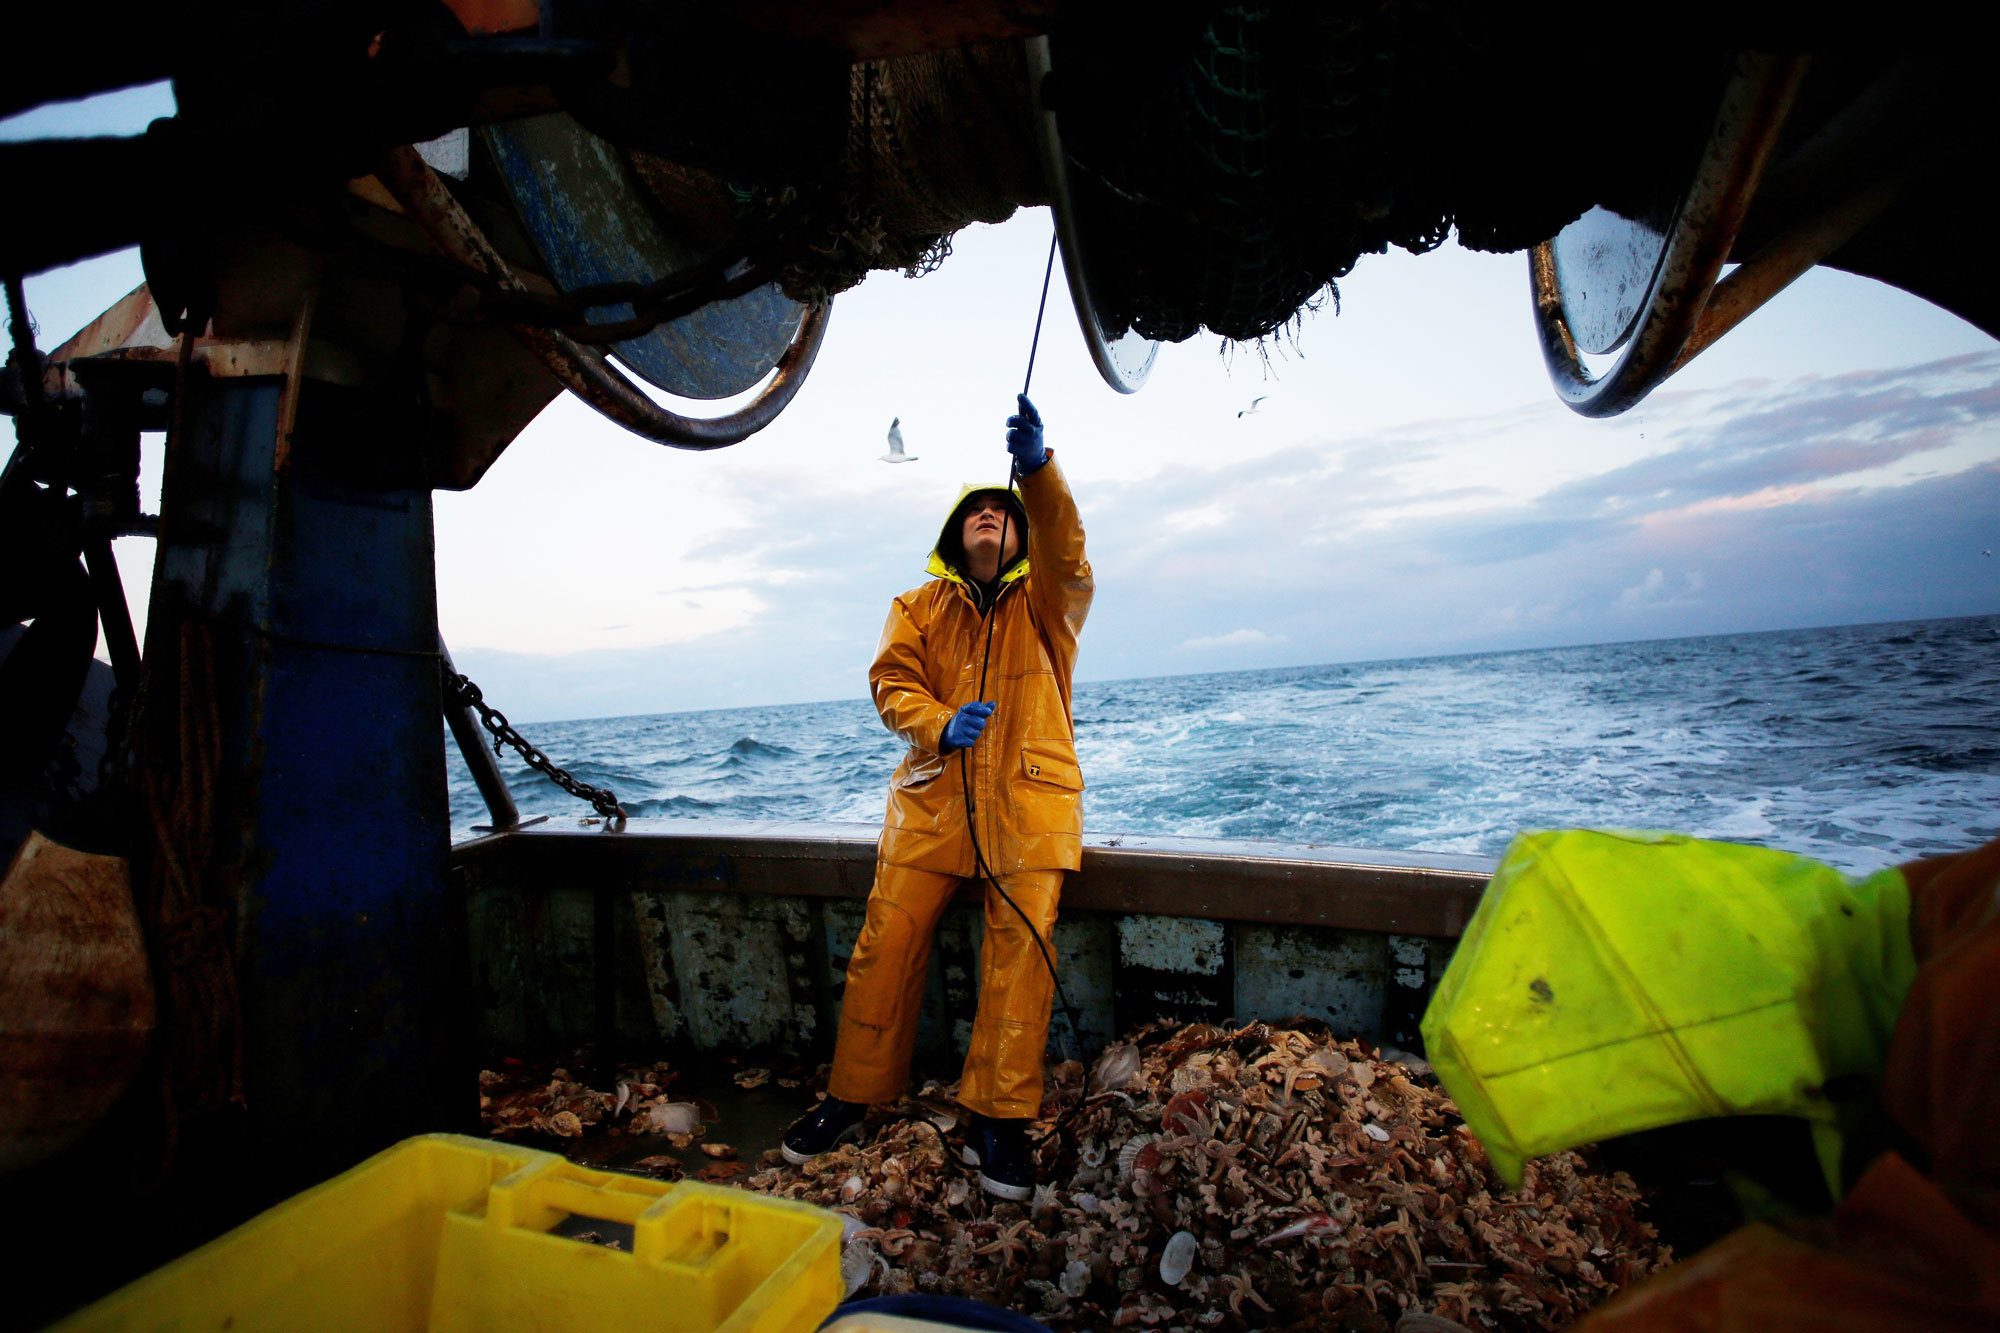 Commercial fishing is an important maritime industry